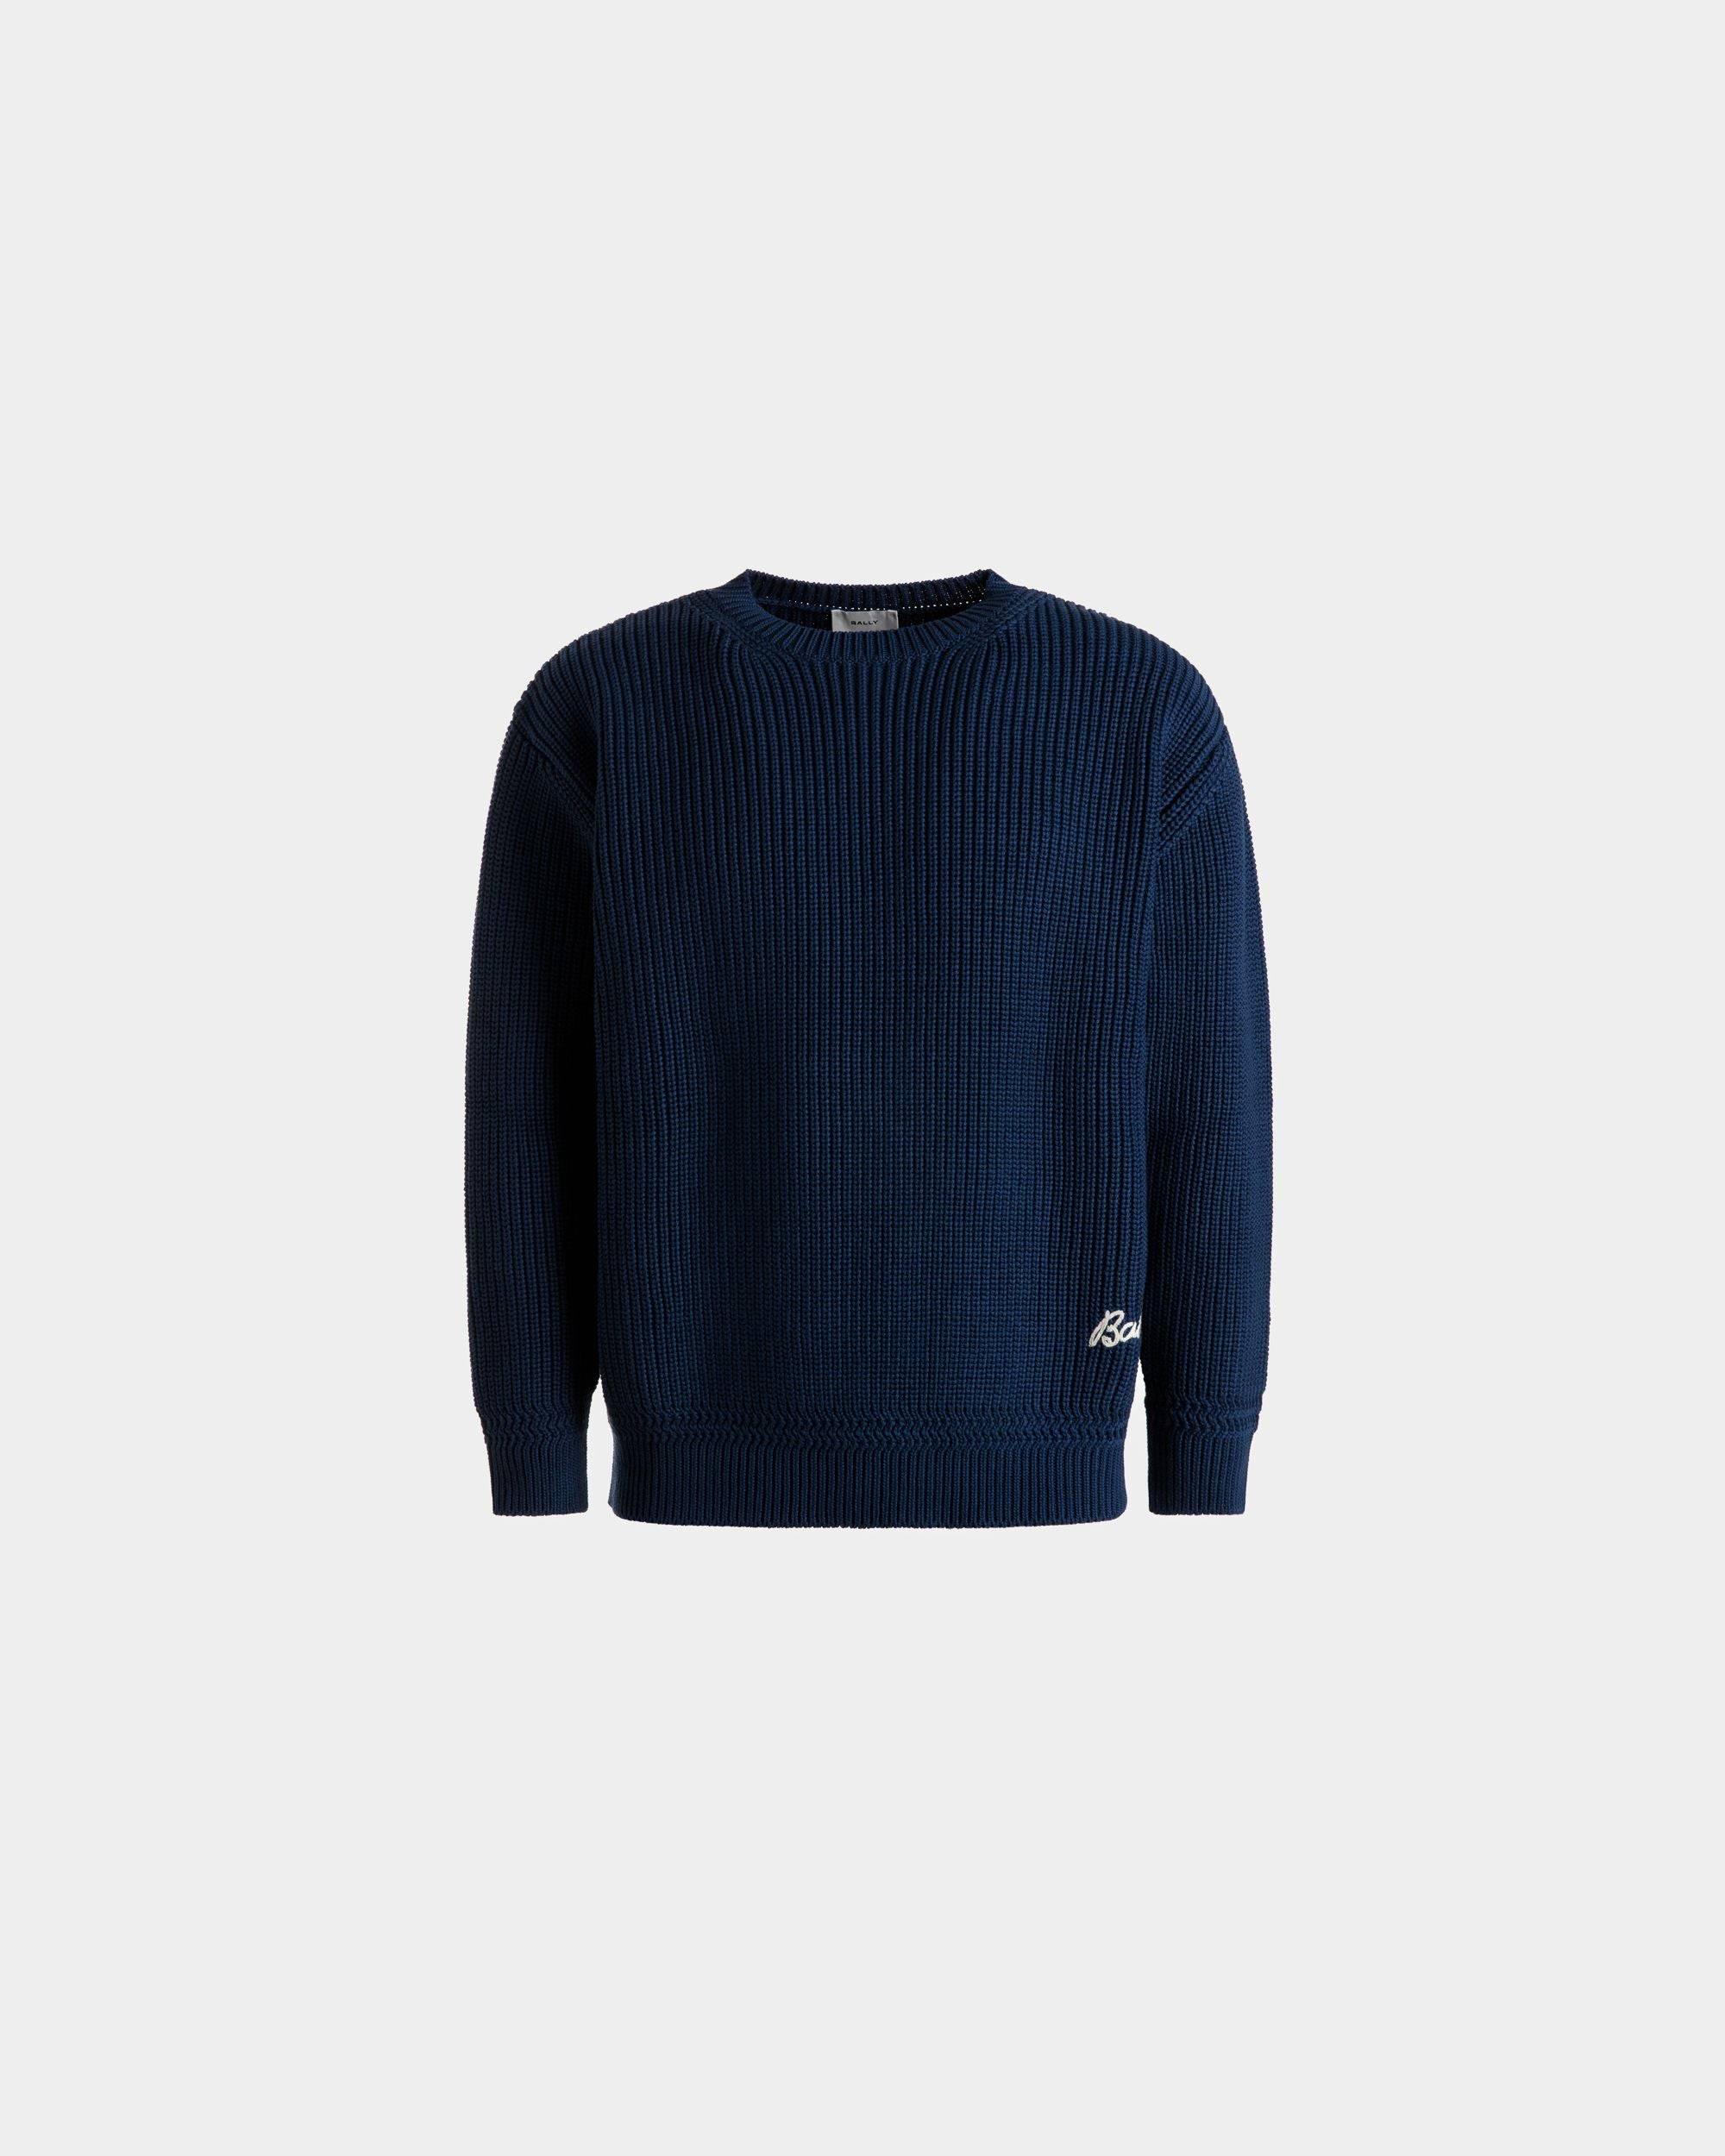 Men's Crewneck Sweater in Blue Cotton | Bally | Still Life Front